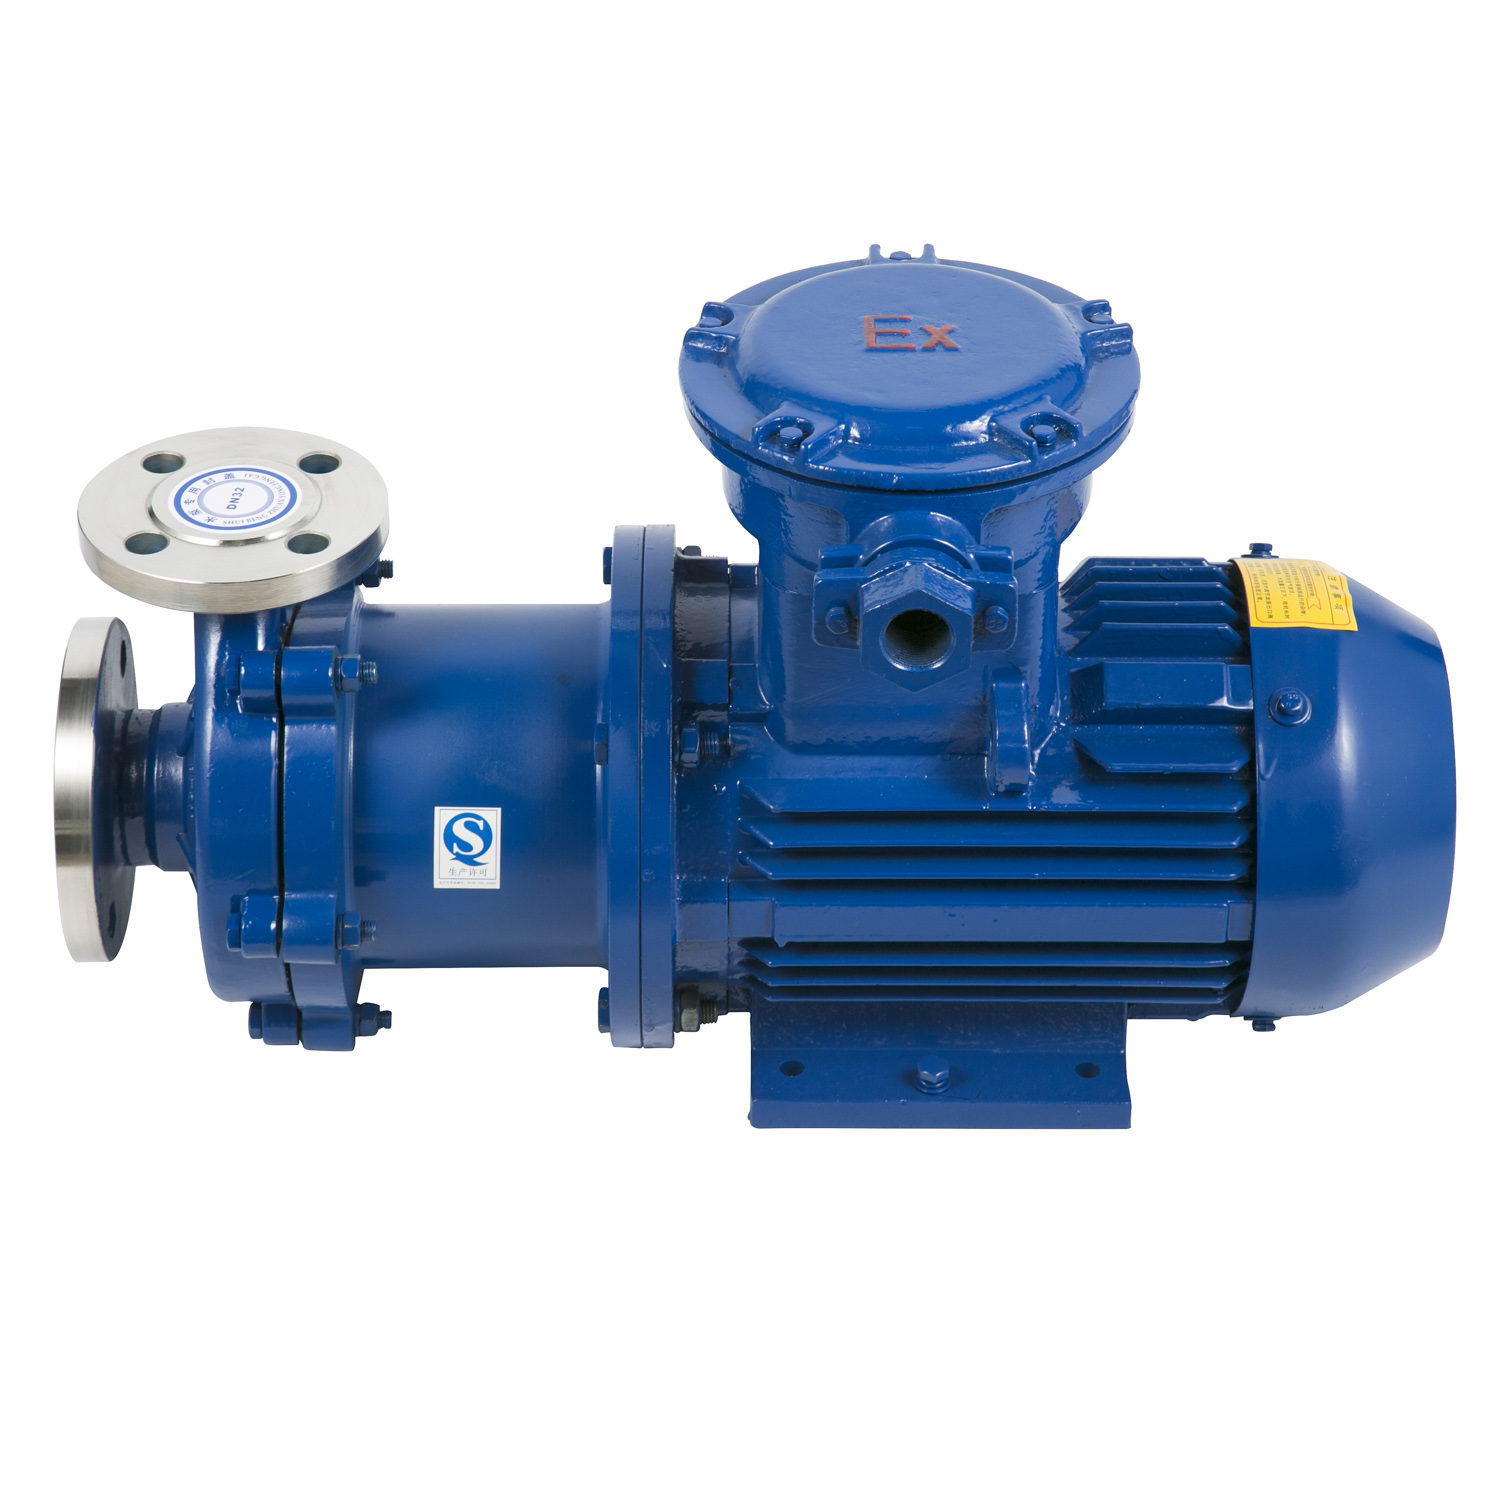  Hot Selling Horizontal Ss/Stainless Steel Open/Closed Impeller Chemical Centrifugal Pump 